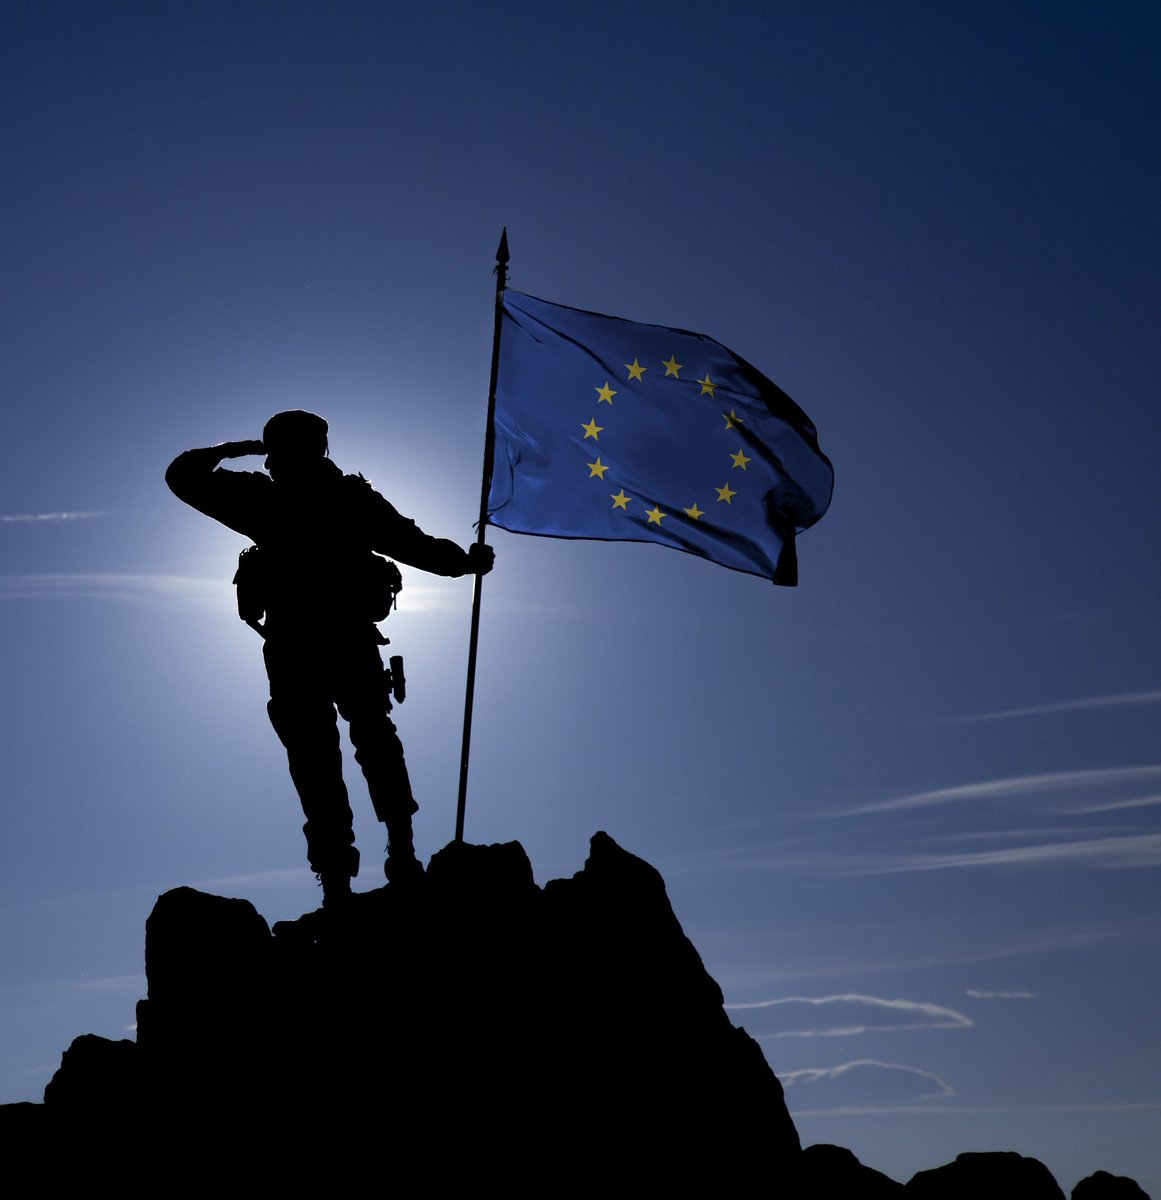 Come on, be brave, the European Spring is still ahead of us!
#Europe4
#EuropeanArmy
#FederalEurope